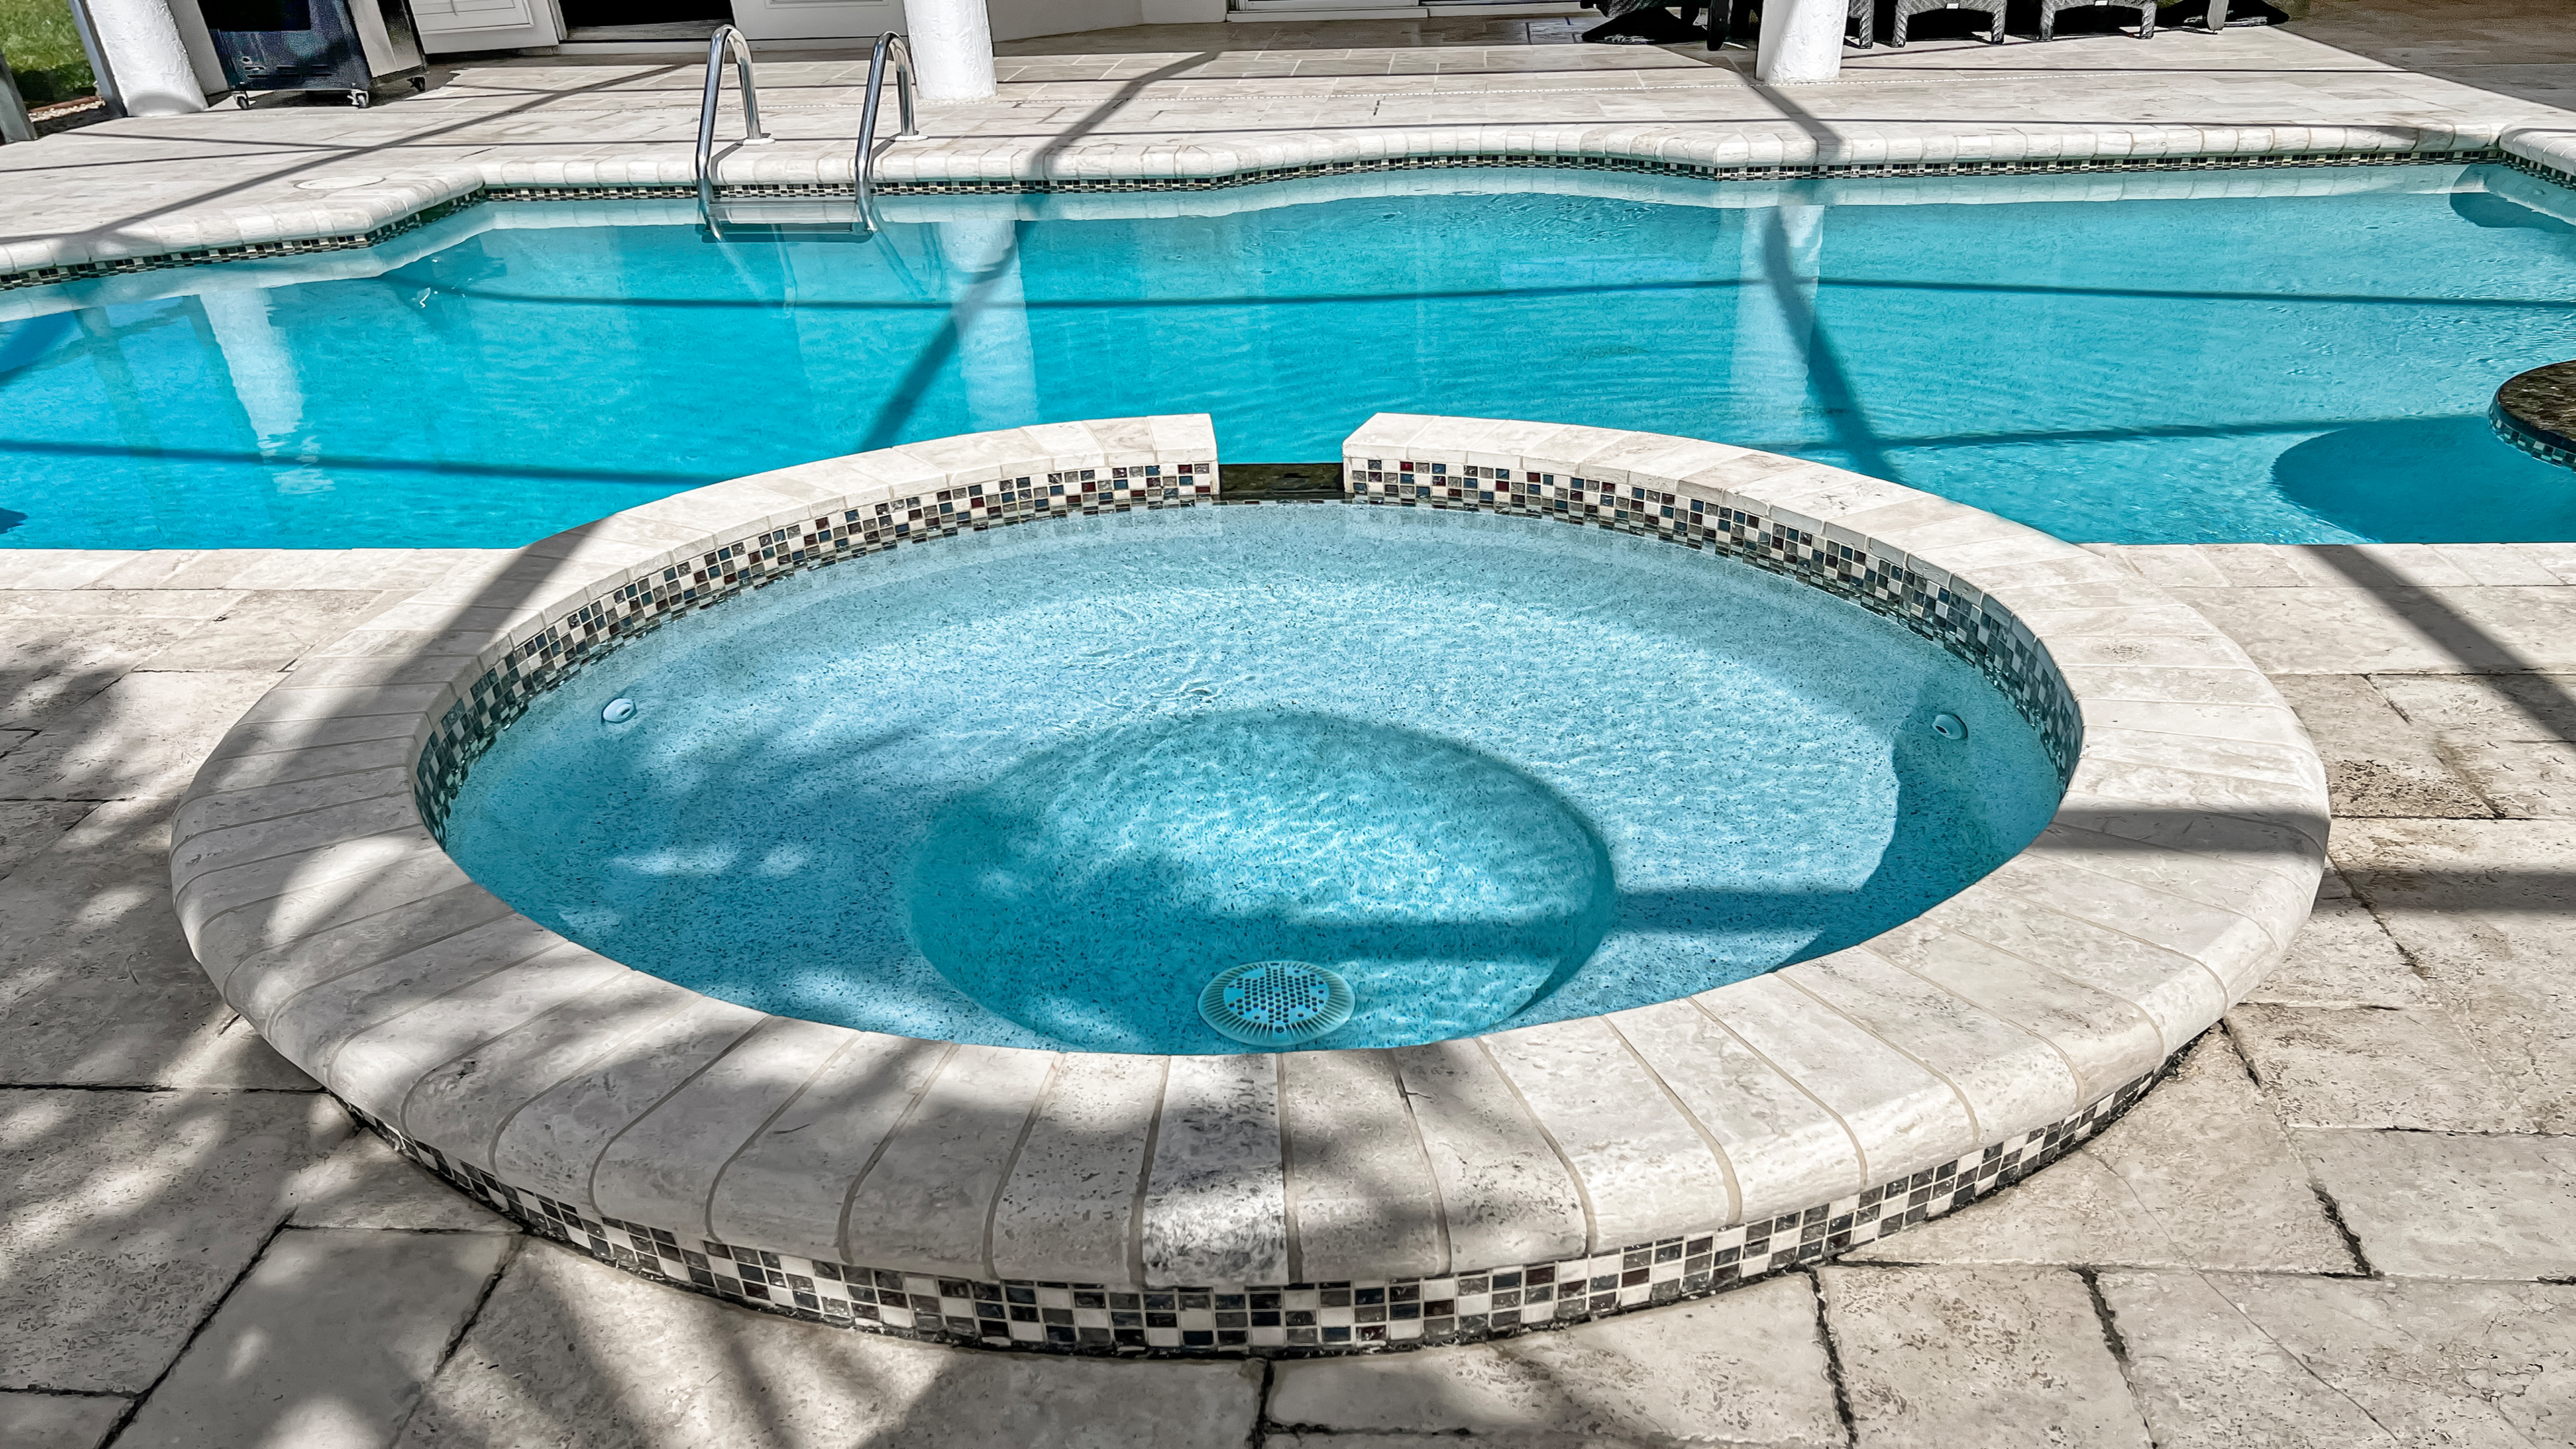 Relax in the whirlpool - what could be better after a busy day of sightseeing